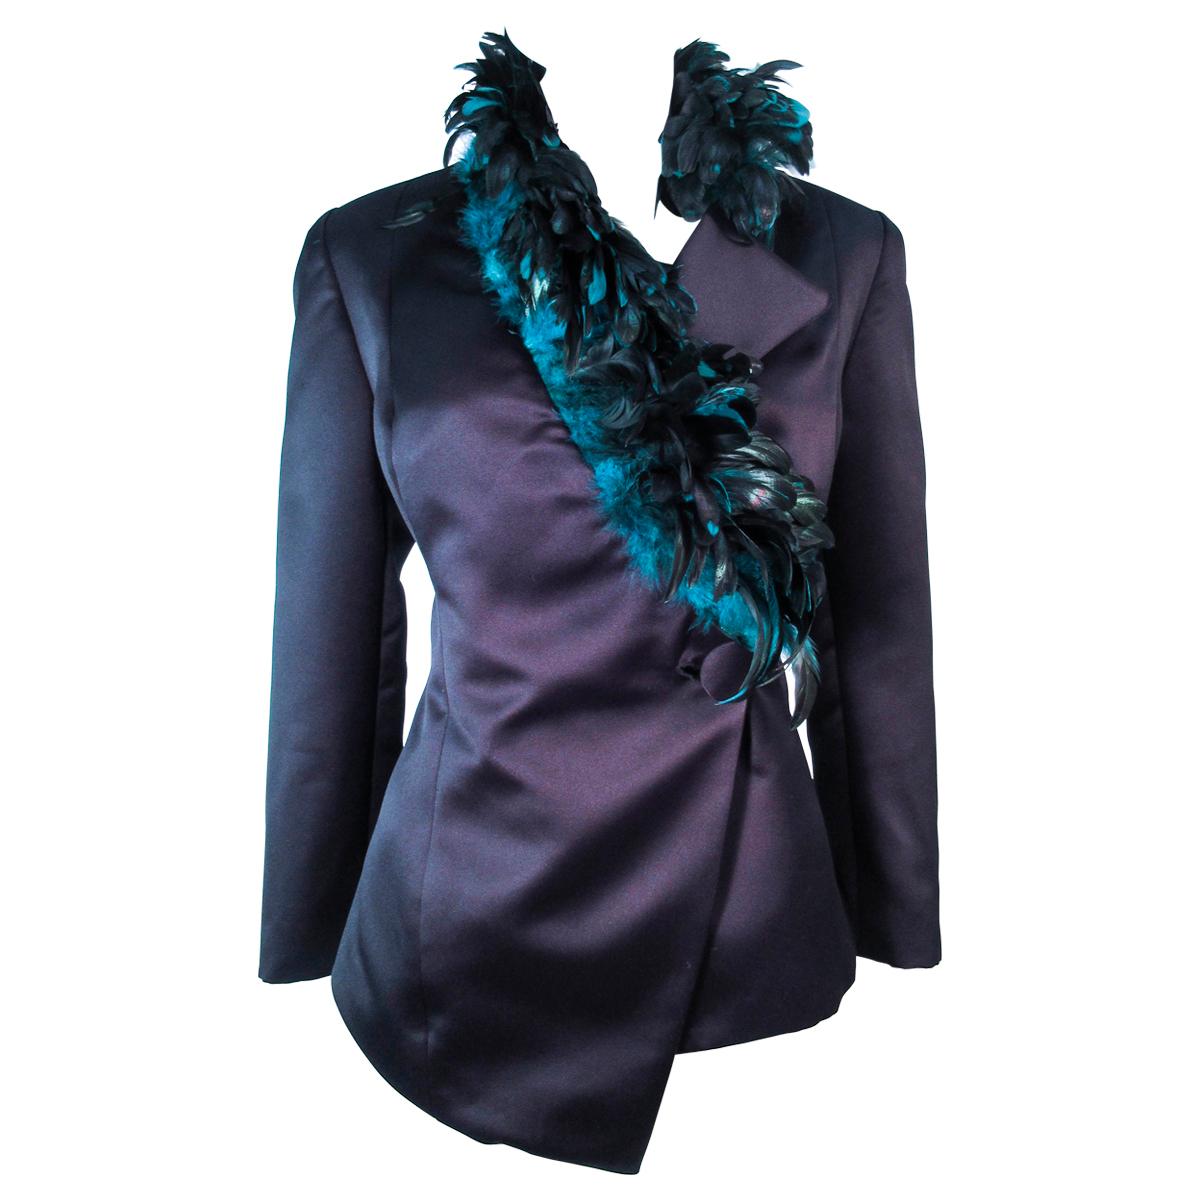 POL ATTEU Satin Evening Jacket with Iridescent Feather Collar Trim Size 12 For Sale